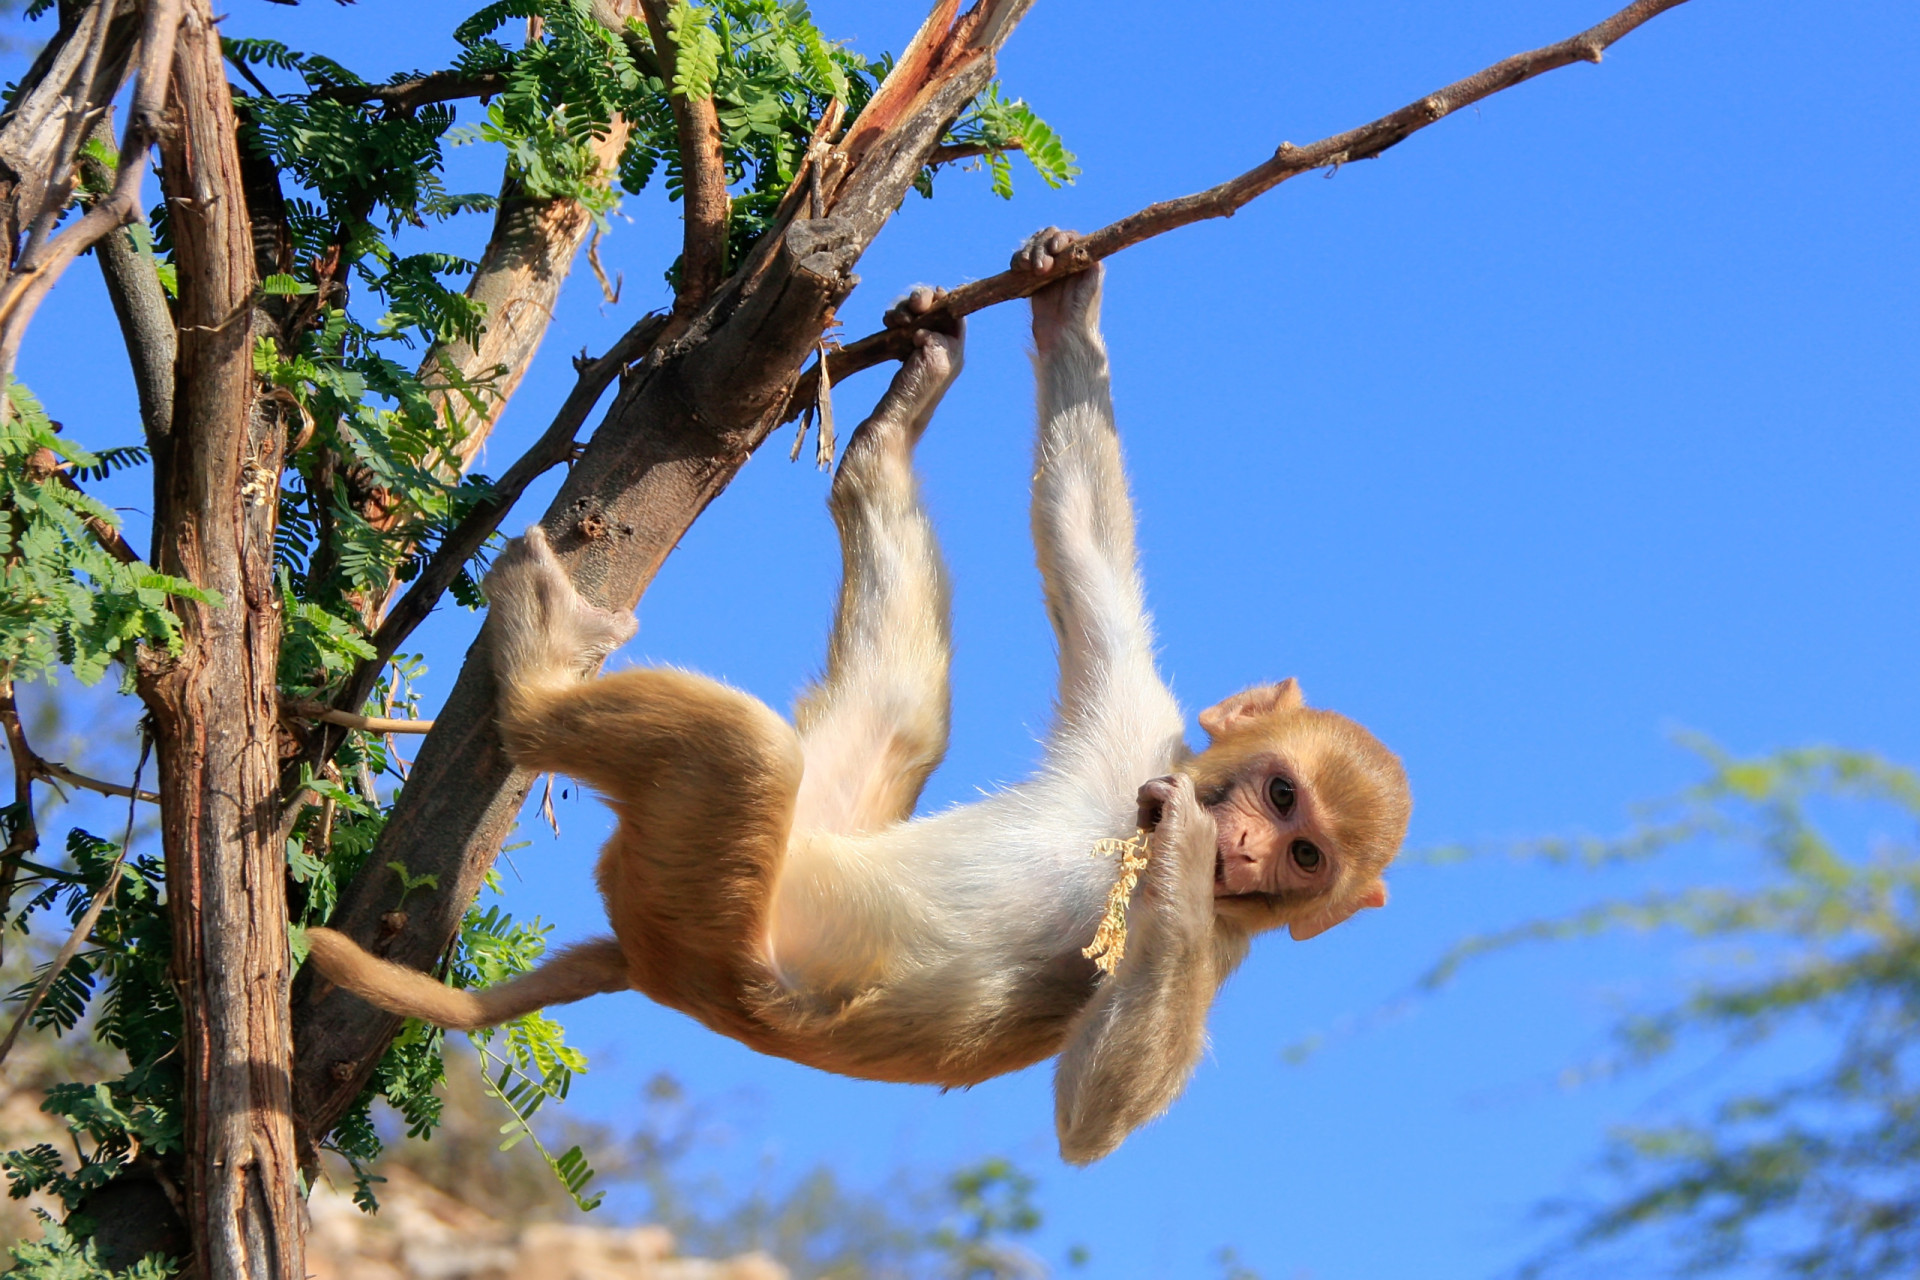 <p>Get in a boat and head out to this island overrun by rhesus monkeys, which were brought to the island for scientific research.</p><p><a href="https://www.msn.com/en-us/community/channel/vid-7xx8mnucu55yw63we9va2gwr7uihbxwc68fxqp25x6tg4ftibpra?cvid=94631541bc0f4f89bfd59158d696ad7e">Follow us and access great exclusive content every day</a></p>